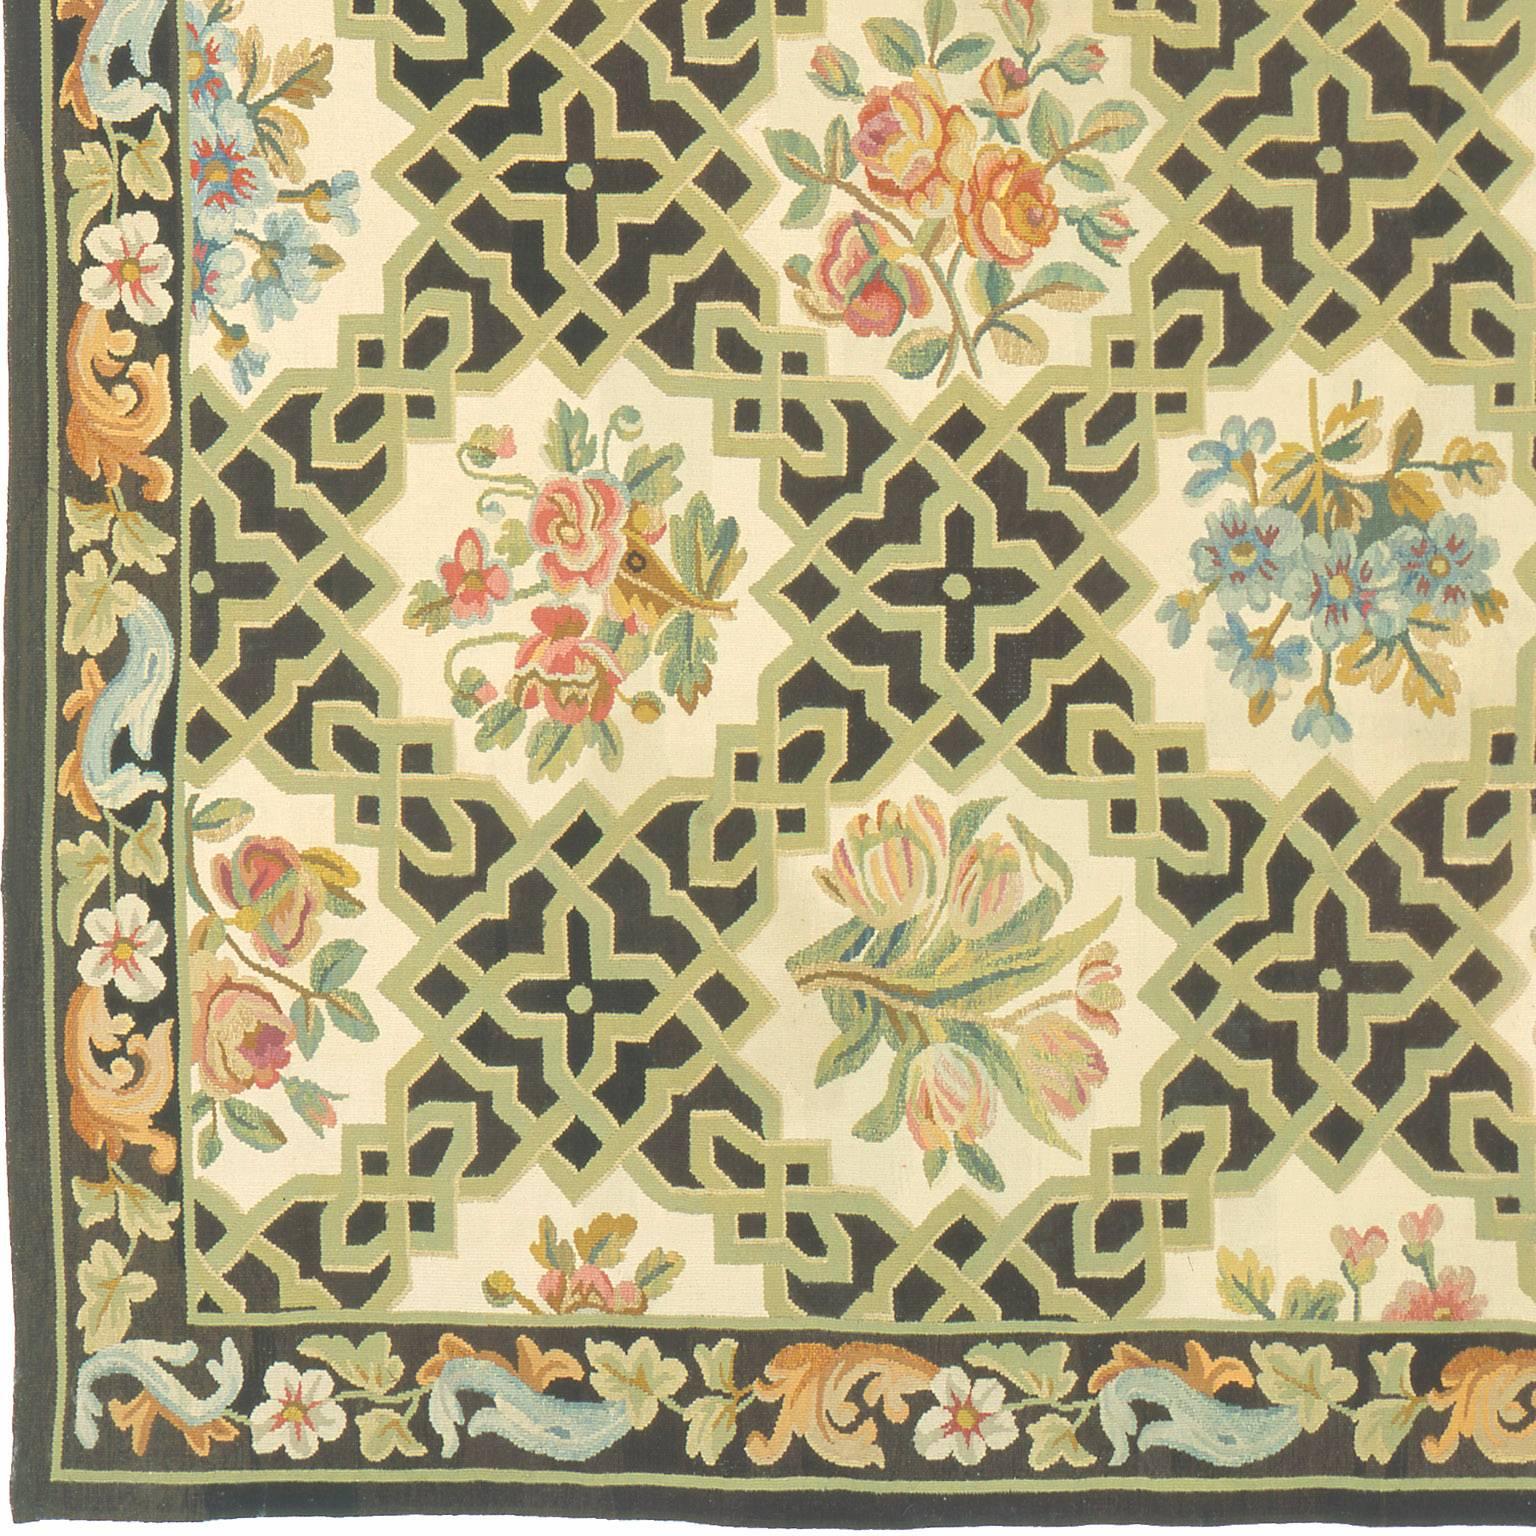 Early 20th century Aubusson carpet.